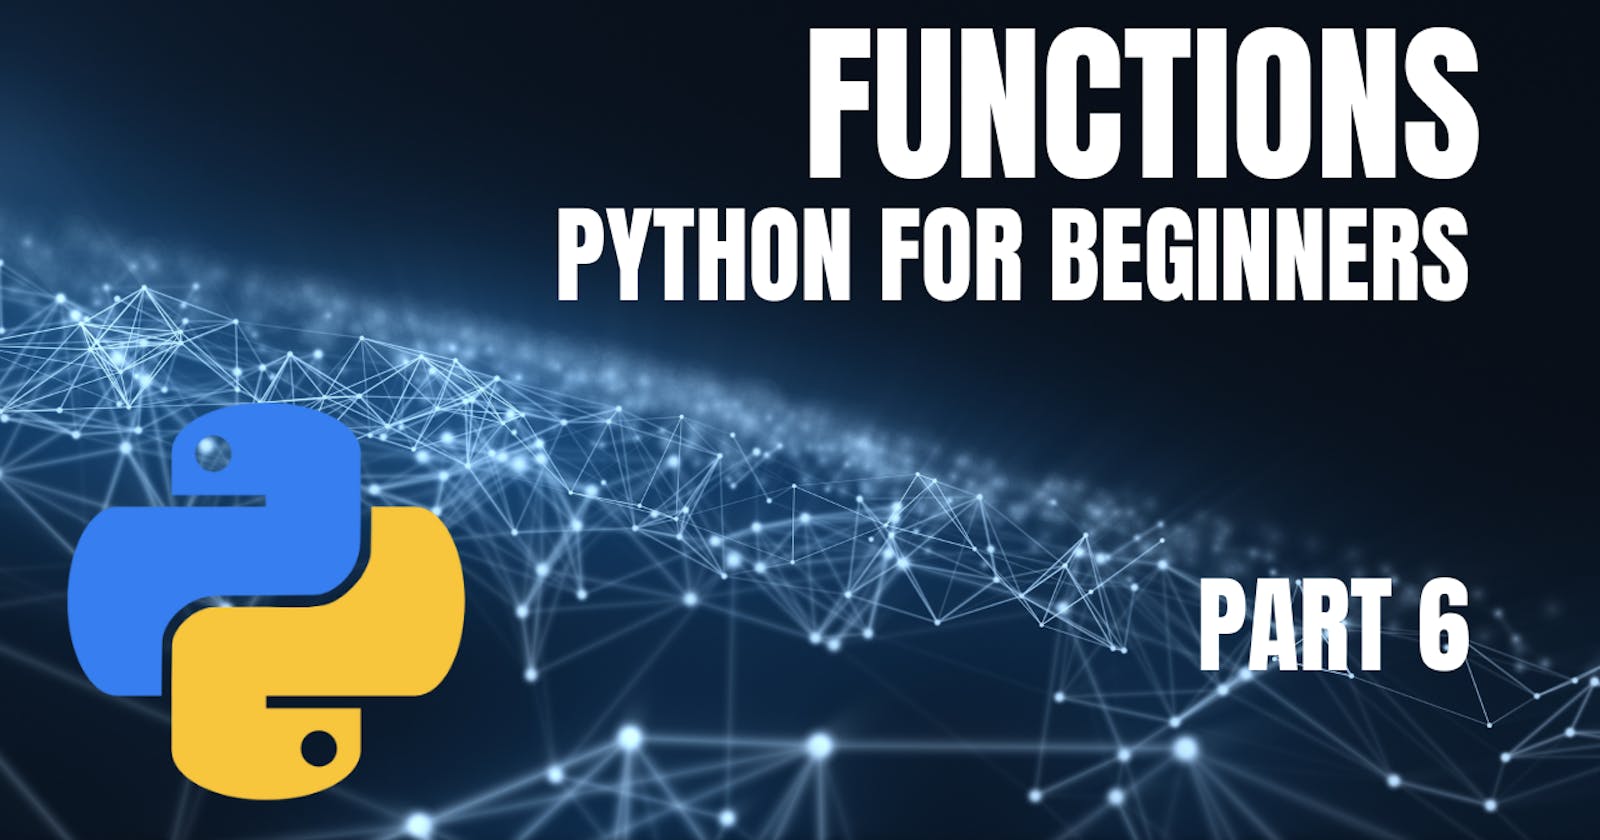 Python for Beginners: Part 6 - Functions